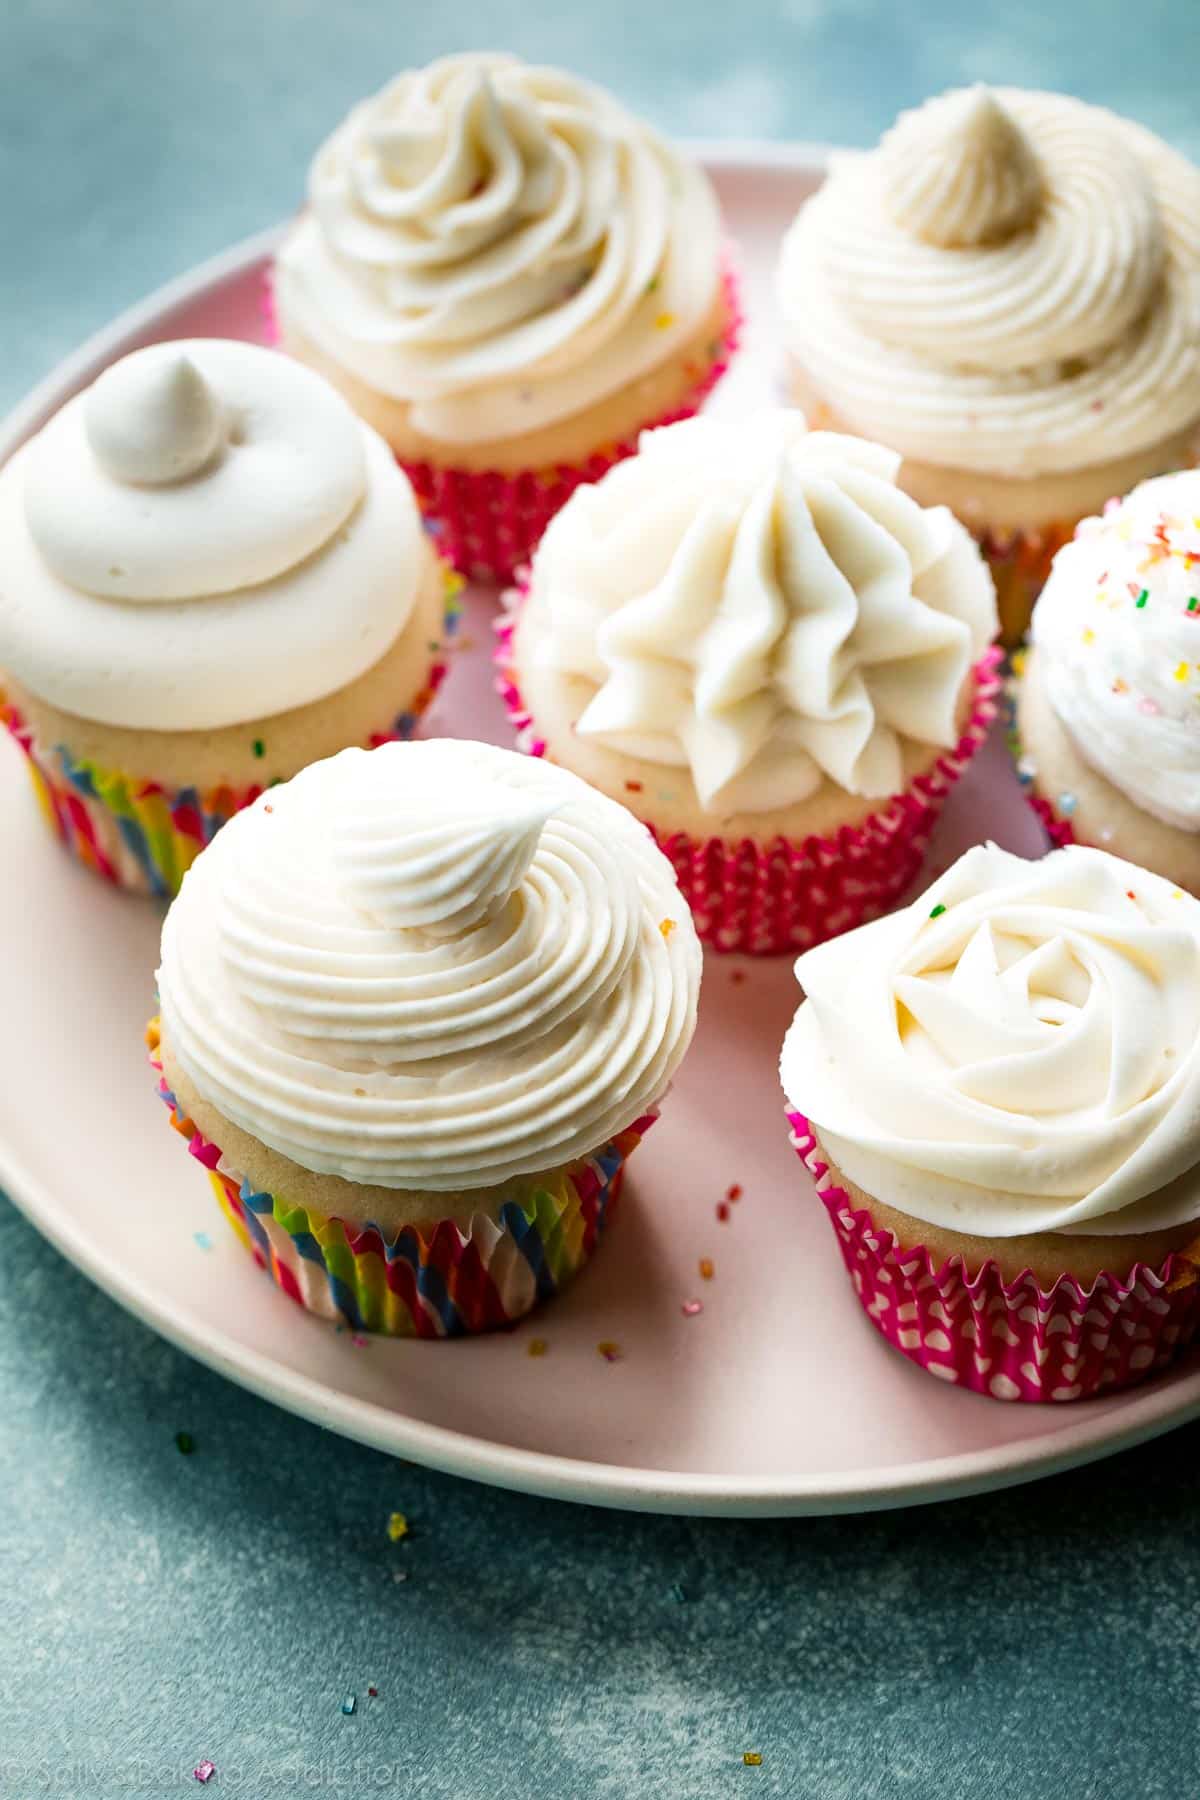 cupcakes decorated with vanilla buttercream using various piping tips